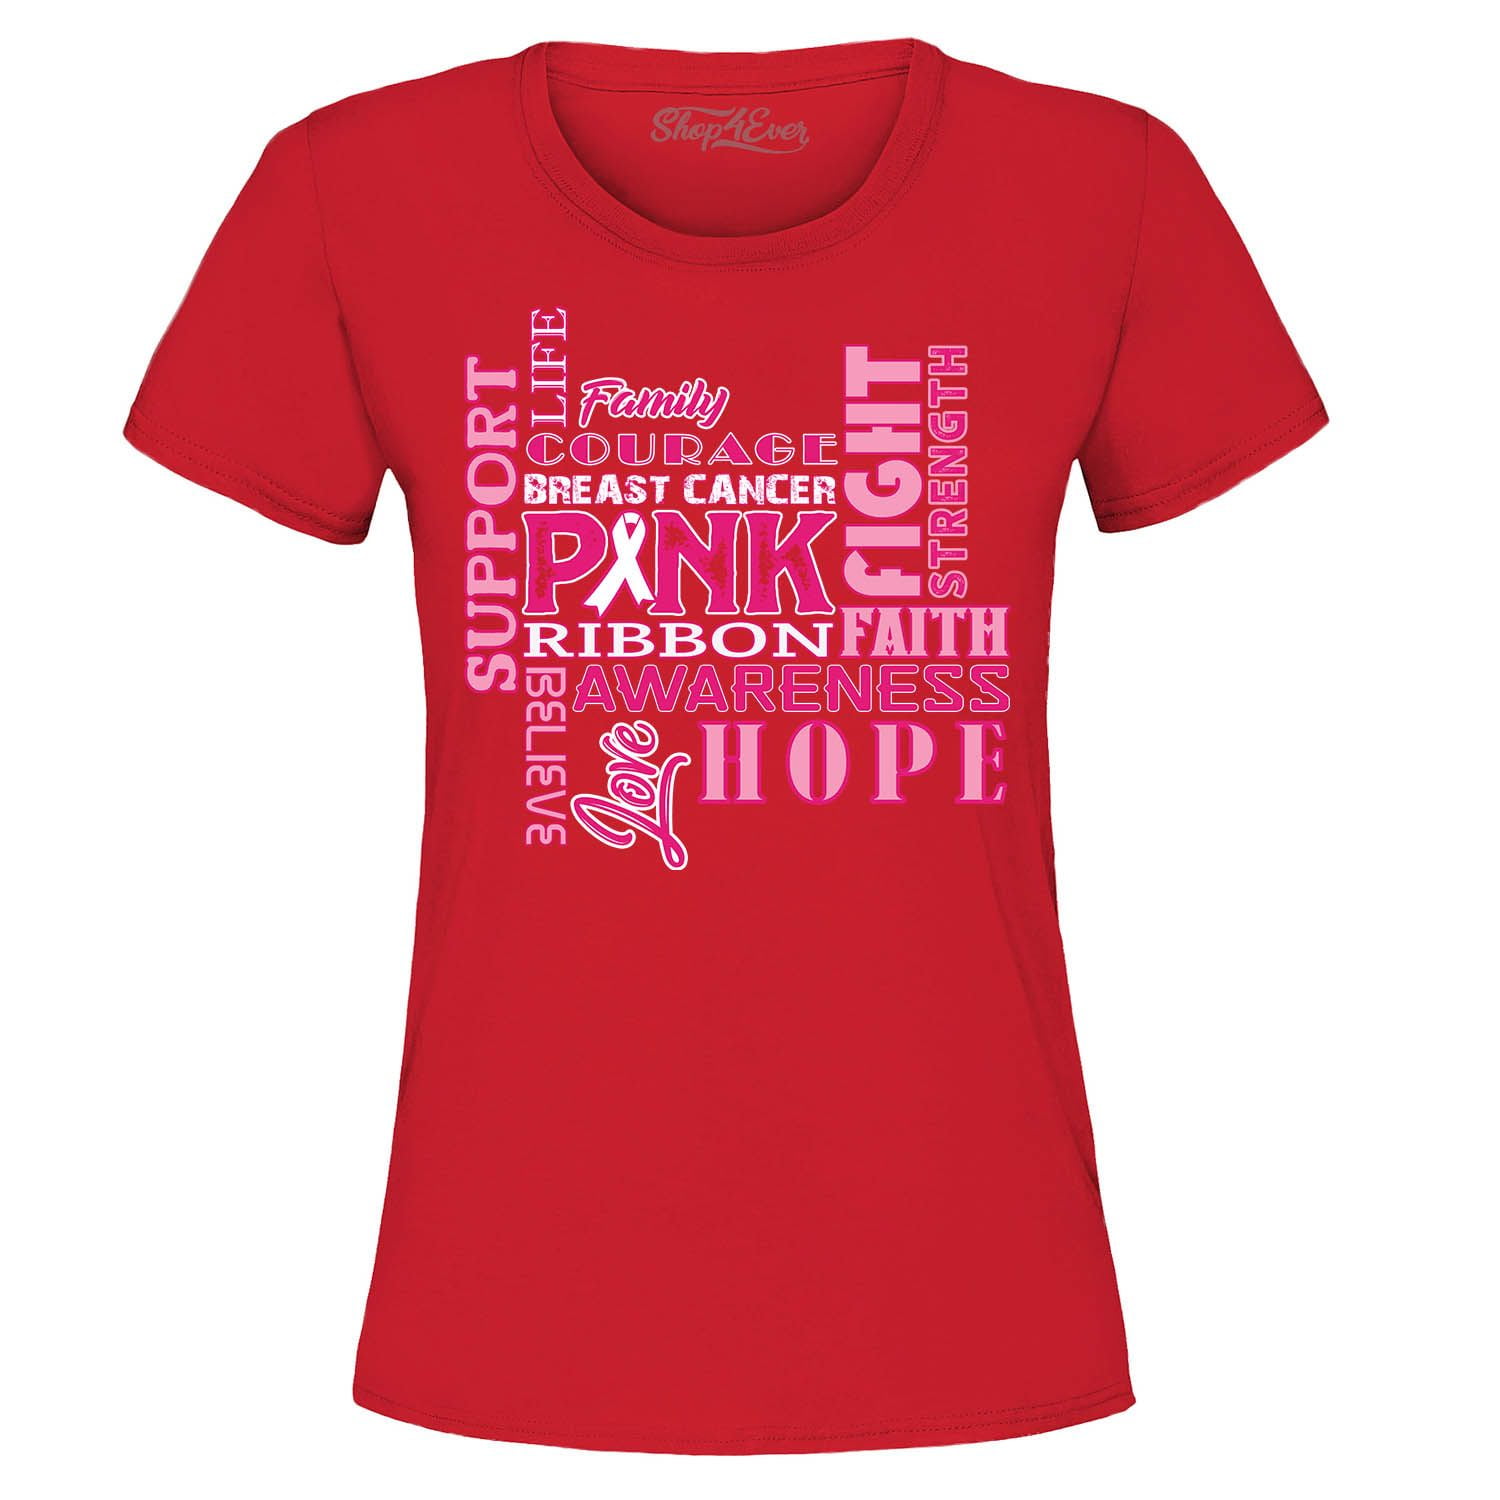 Shop4Ever Women's Breast Cancer Support Fight Ribbon Awareness